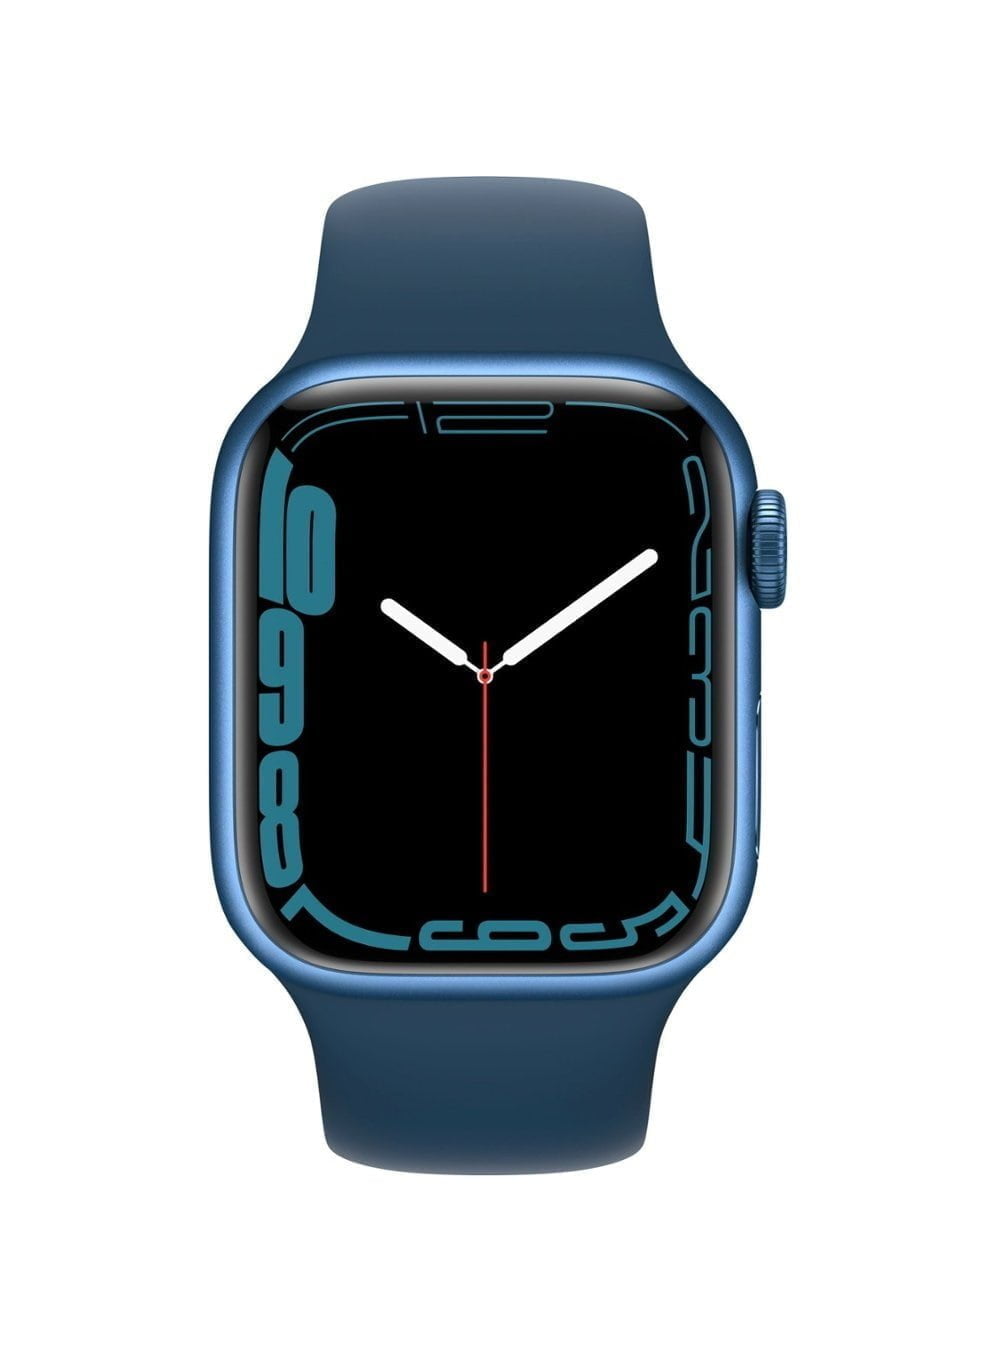 6215935Cv11D 1.Jpgmaxheight1000Maxwidth1000 1 Apple &Lt;H1&Gt;Apple Watch Series 7 (Gps) 41Mm Blue Aluminum Case With Abyss Blue Sport Band - Blue&Lt;/H1&Gt; &Lt;Div Class=&Quot;Long-Description-Container Body-Copy &Quot;&Gt; &Lt;Div Class=&Quot;Html-Fragment&Quot;&Gt; &Lt;Div&Gt; &Lt;Div&Gt; &Lt;H2&Gt;Model : Mkn13&Lt;/H2&Gt; &Lt;/Div&Gt; &Lt;Div&Gt;The Largest, Most Advanced Always-On Retina Display Yet Makes Everything You Do With Your Apple Watch Series 7 Bigger And Better. Series 7 Is The Most Durable Apple Watch Ever Built, With An Even More Crack-Resistant Front Crystal. Advanced Features Let You Measure Your Blood Oxygen Level,¹ Take An Ecg Anytime,² And Access Mindfulness And Sleep Tracking Apps. You Can Also Track Dozens Of Workouts, Including New Tai Chi And Pilates.&Lt;/Div&Gt; &Lt;/Div&Gt; &Lt;/Div&Gt; &Lt;/Div&Gt; Apple Watch Series Apple Watch Series 7 (Gps) 41Mm Blue Aluminum Case With Abyss Blue Sport Band - Blue